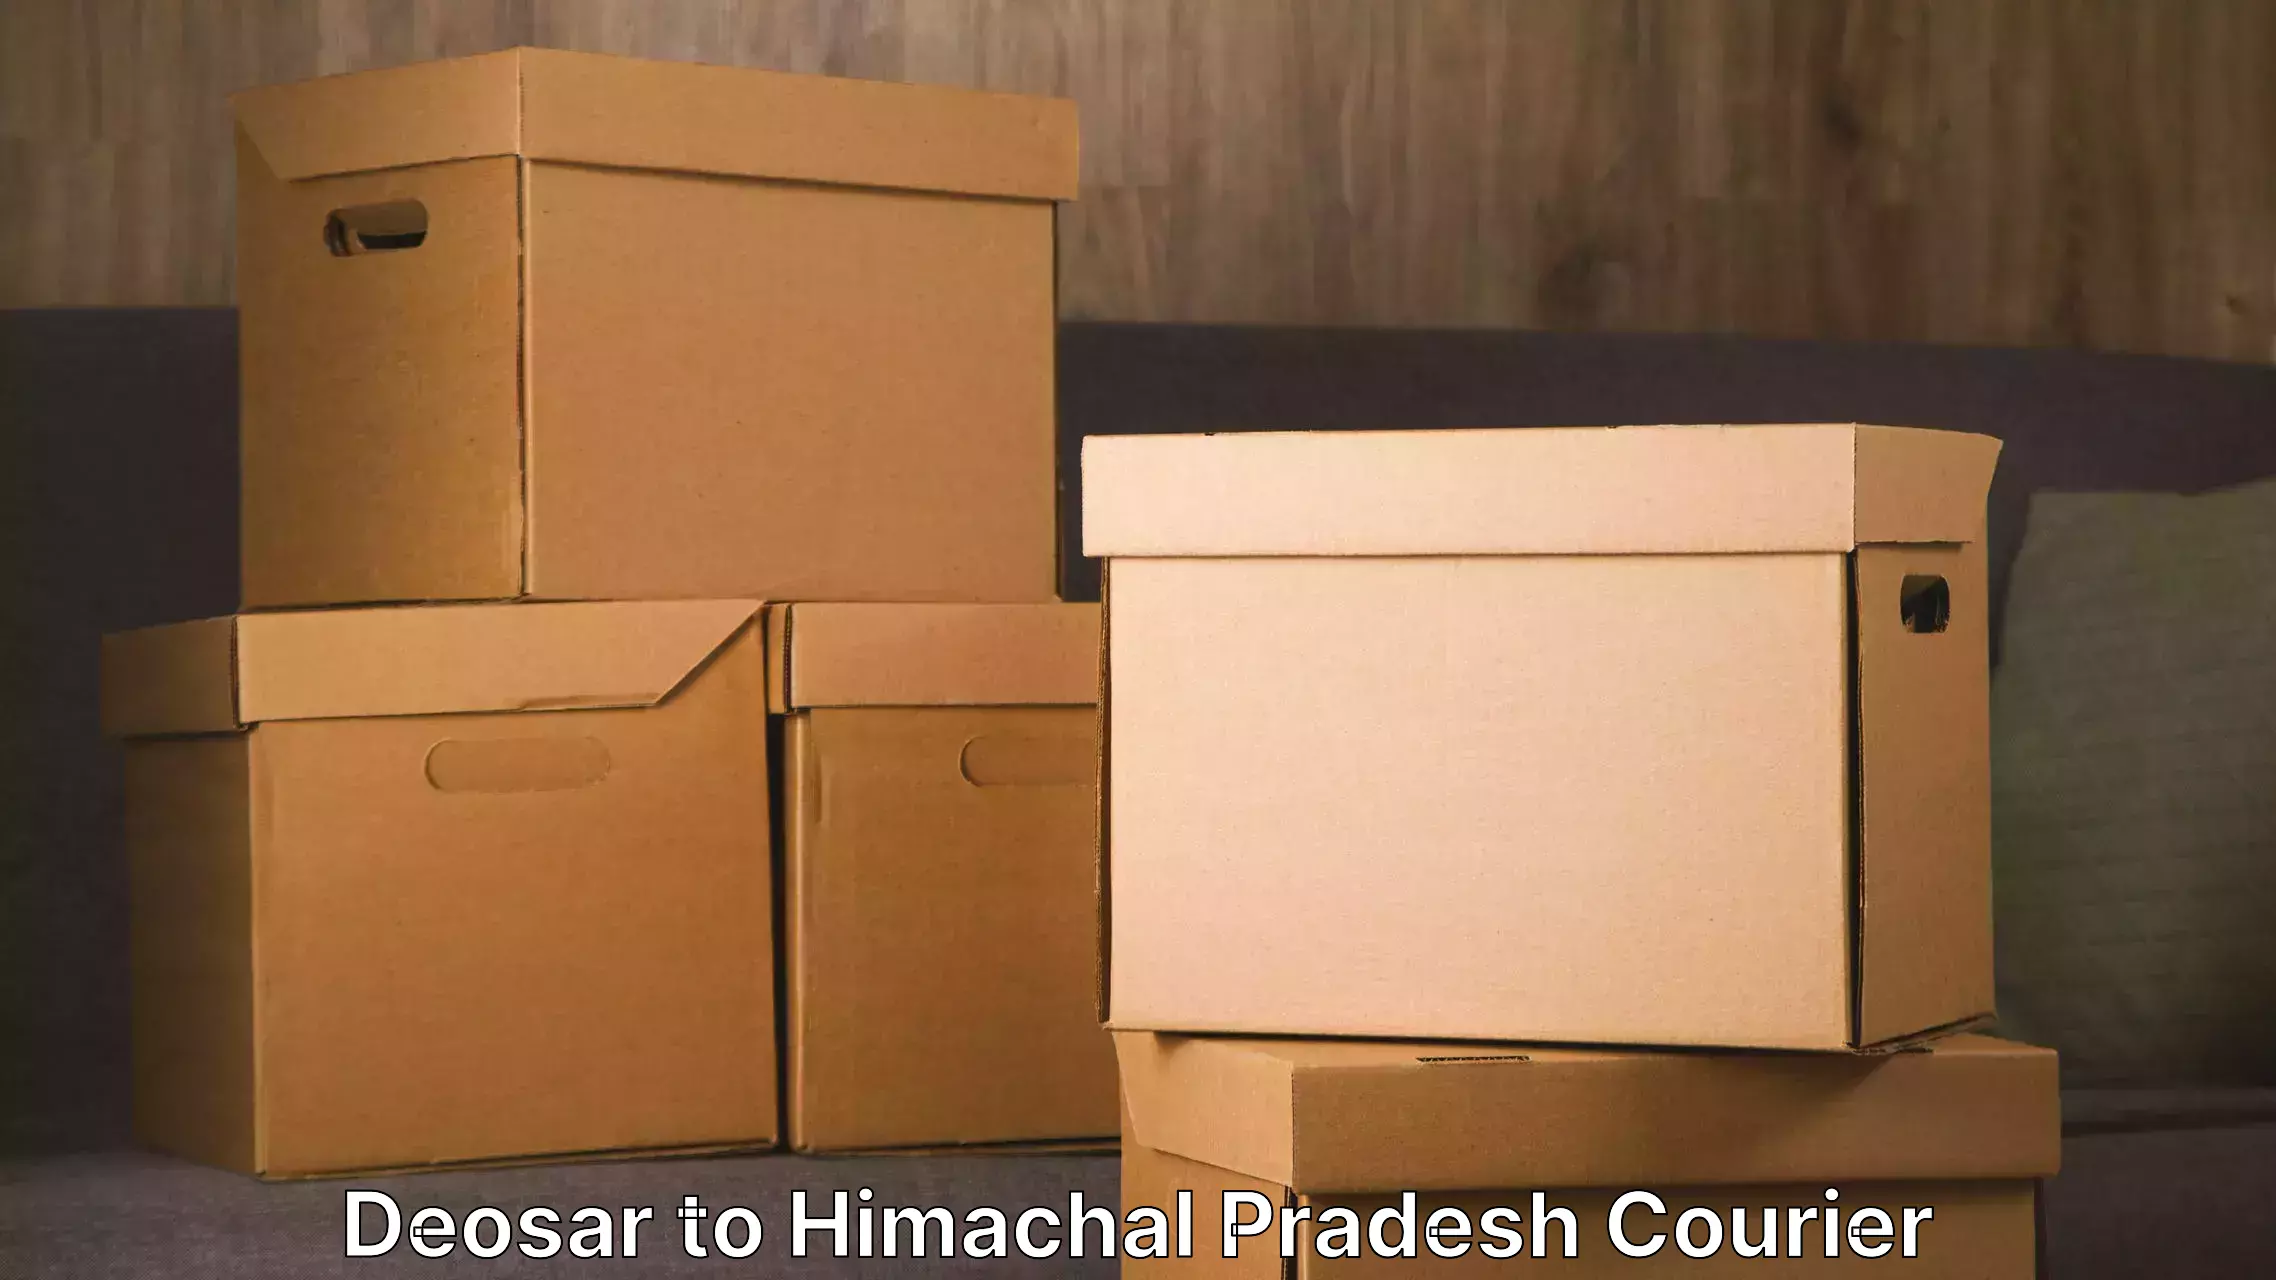 Furniture moving specialists Deosar to Himachal Pradesh